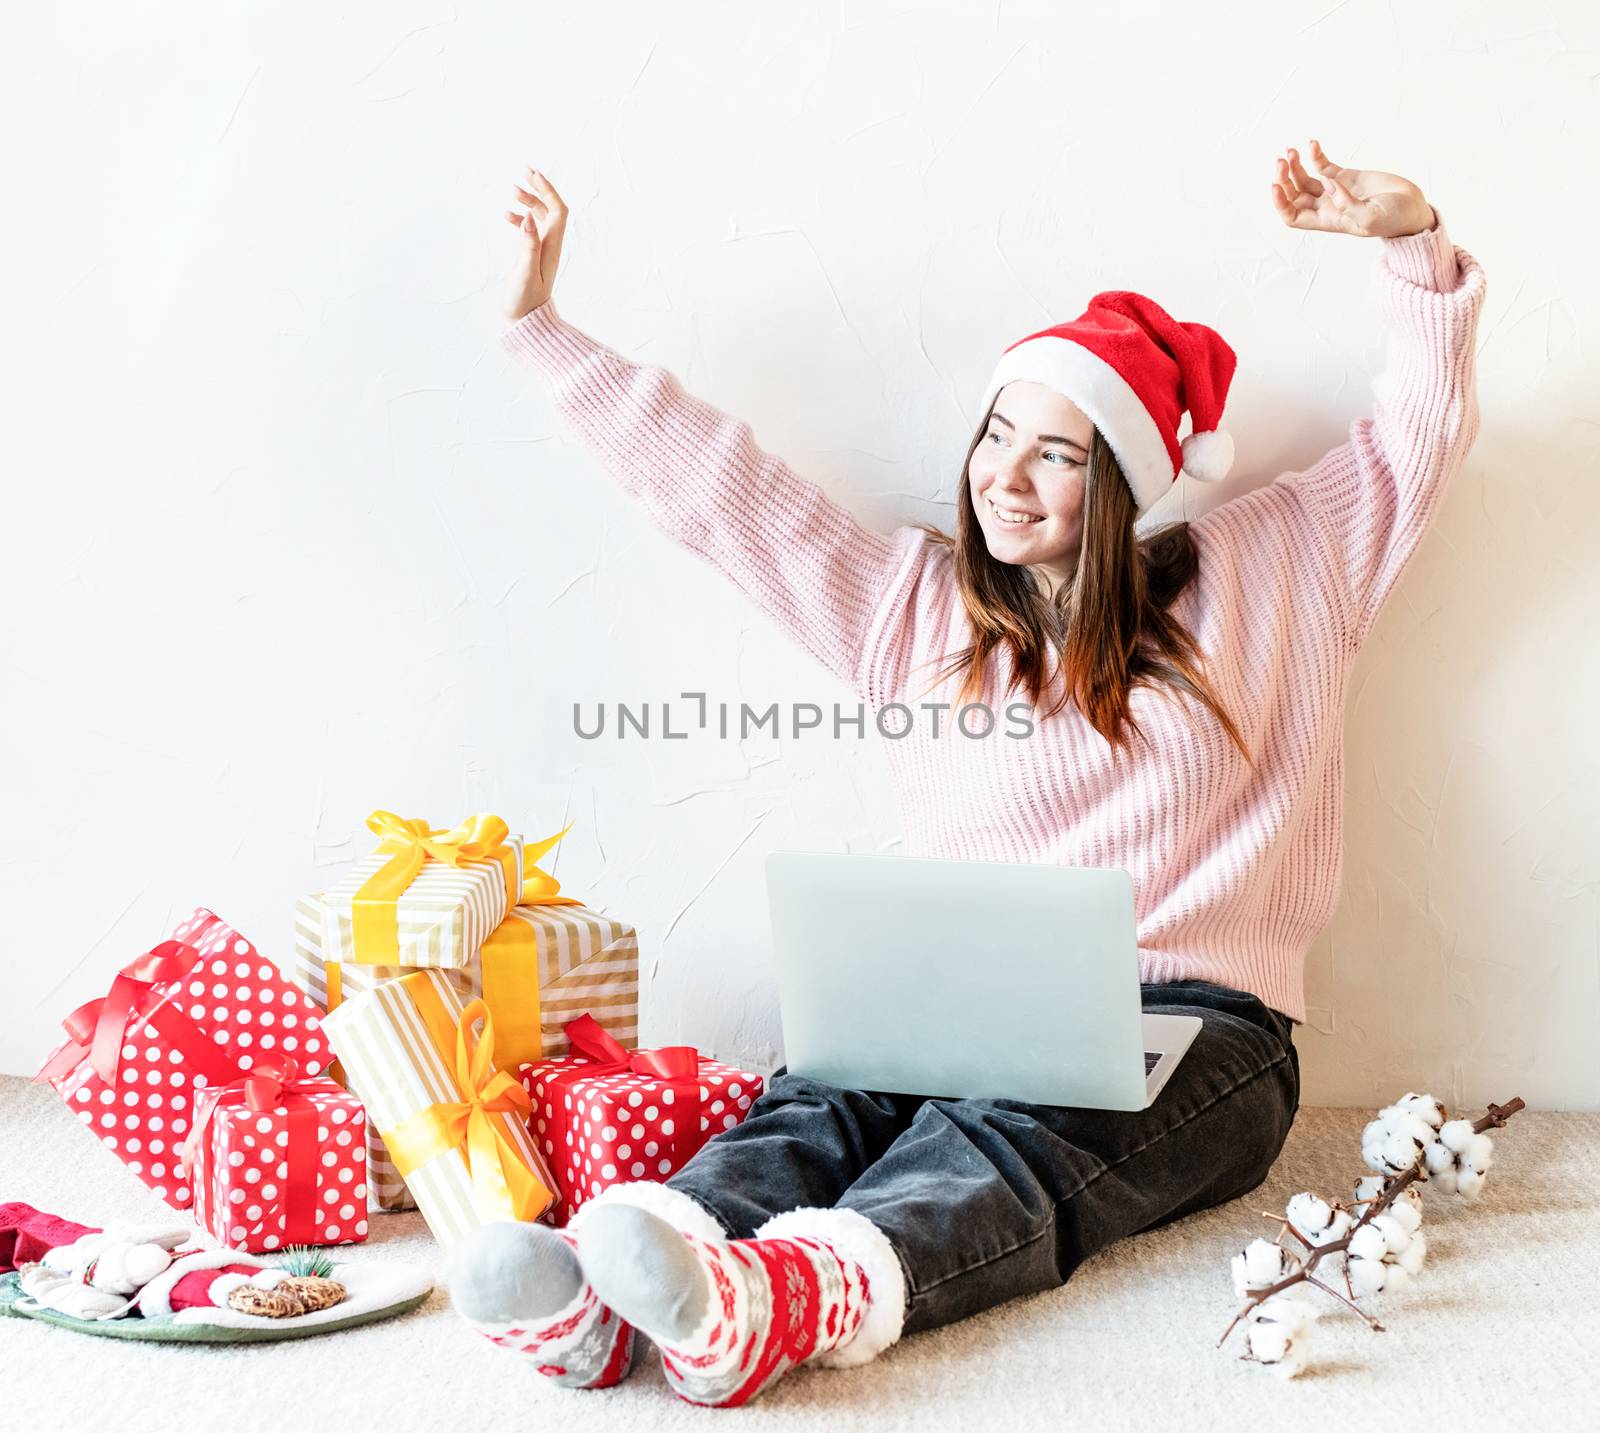 Young woman in santa hat shopping online surrounded by presents by Desperada